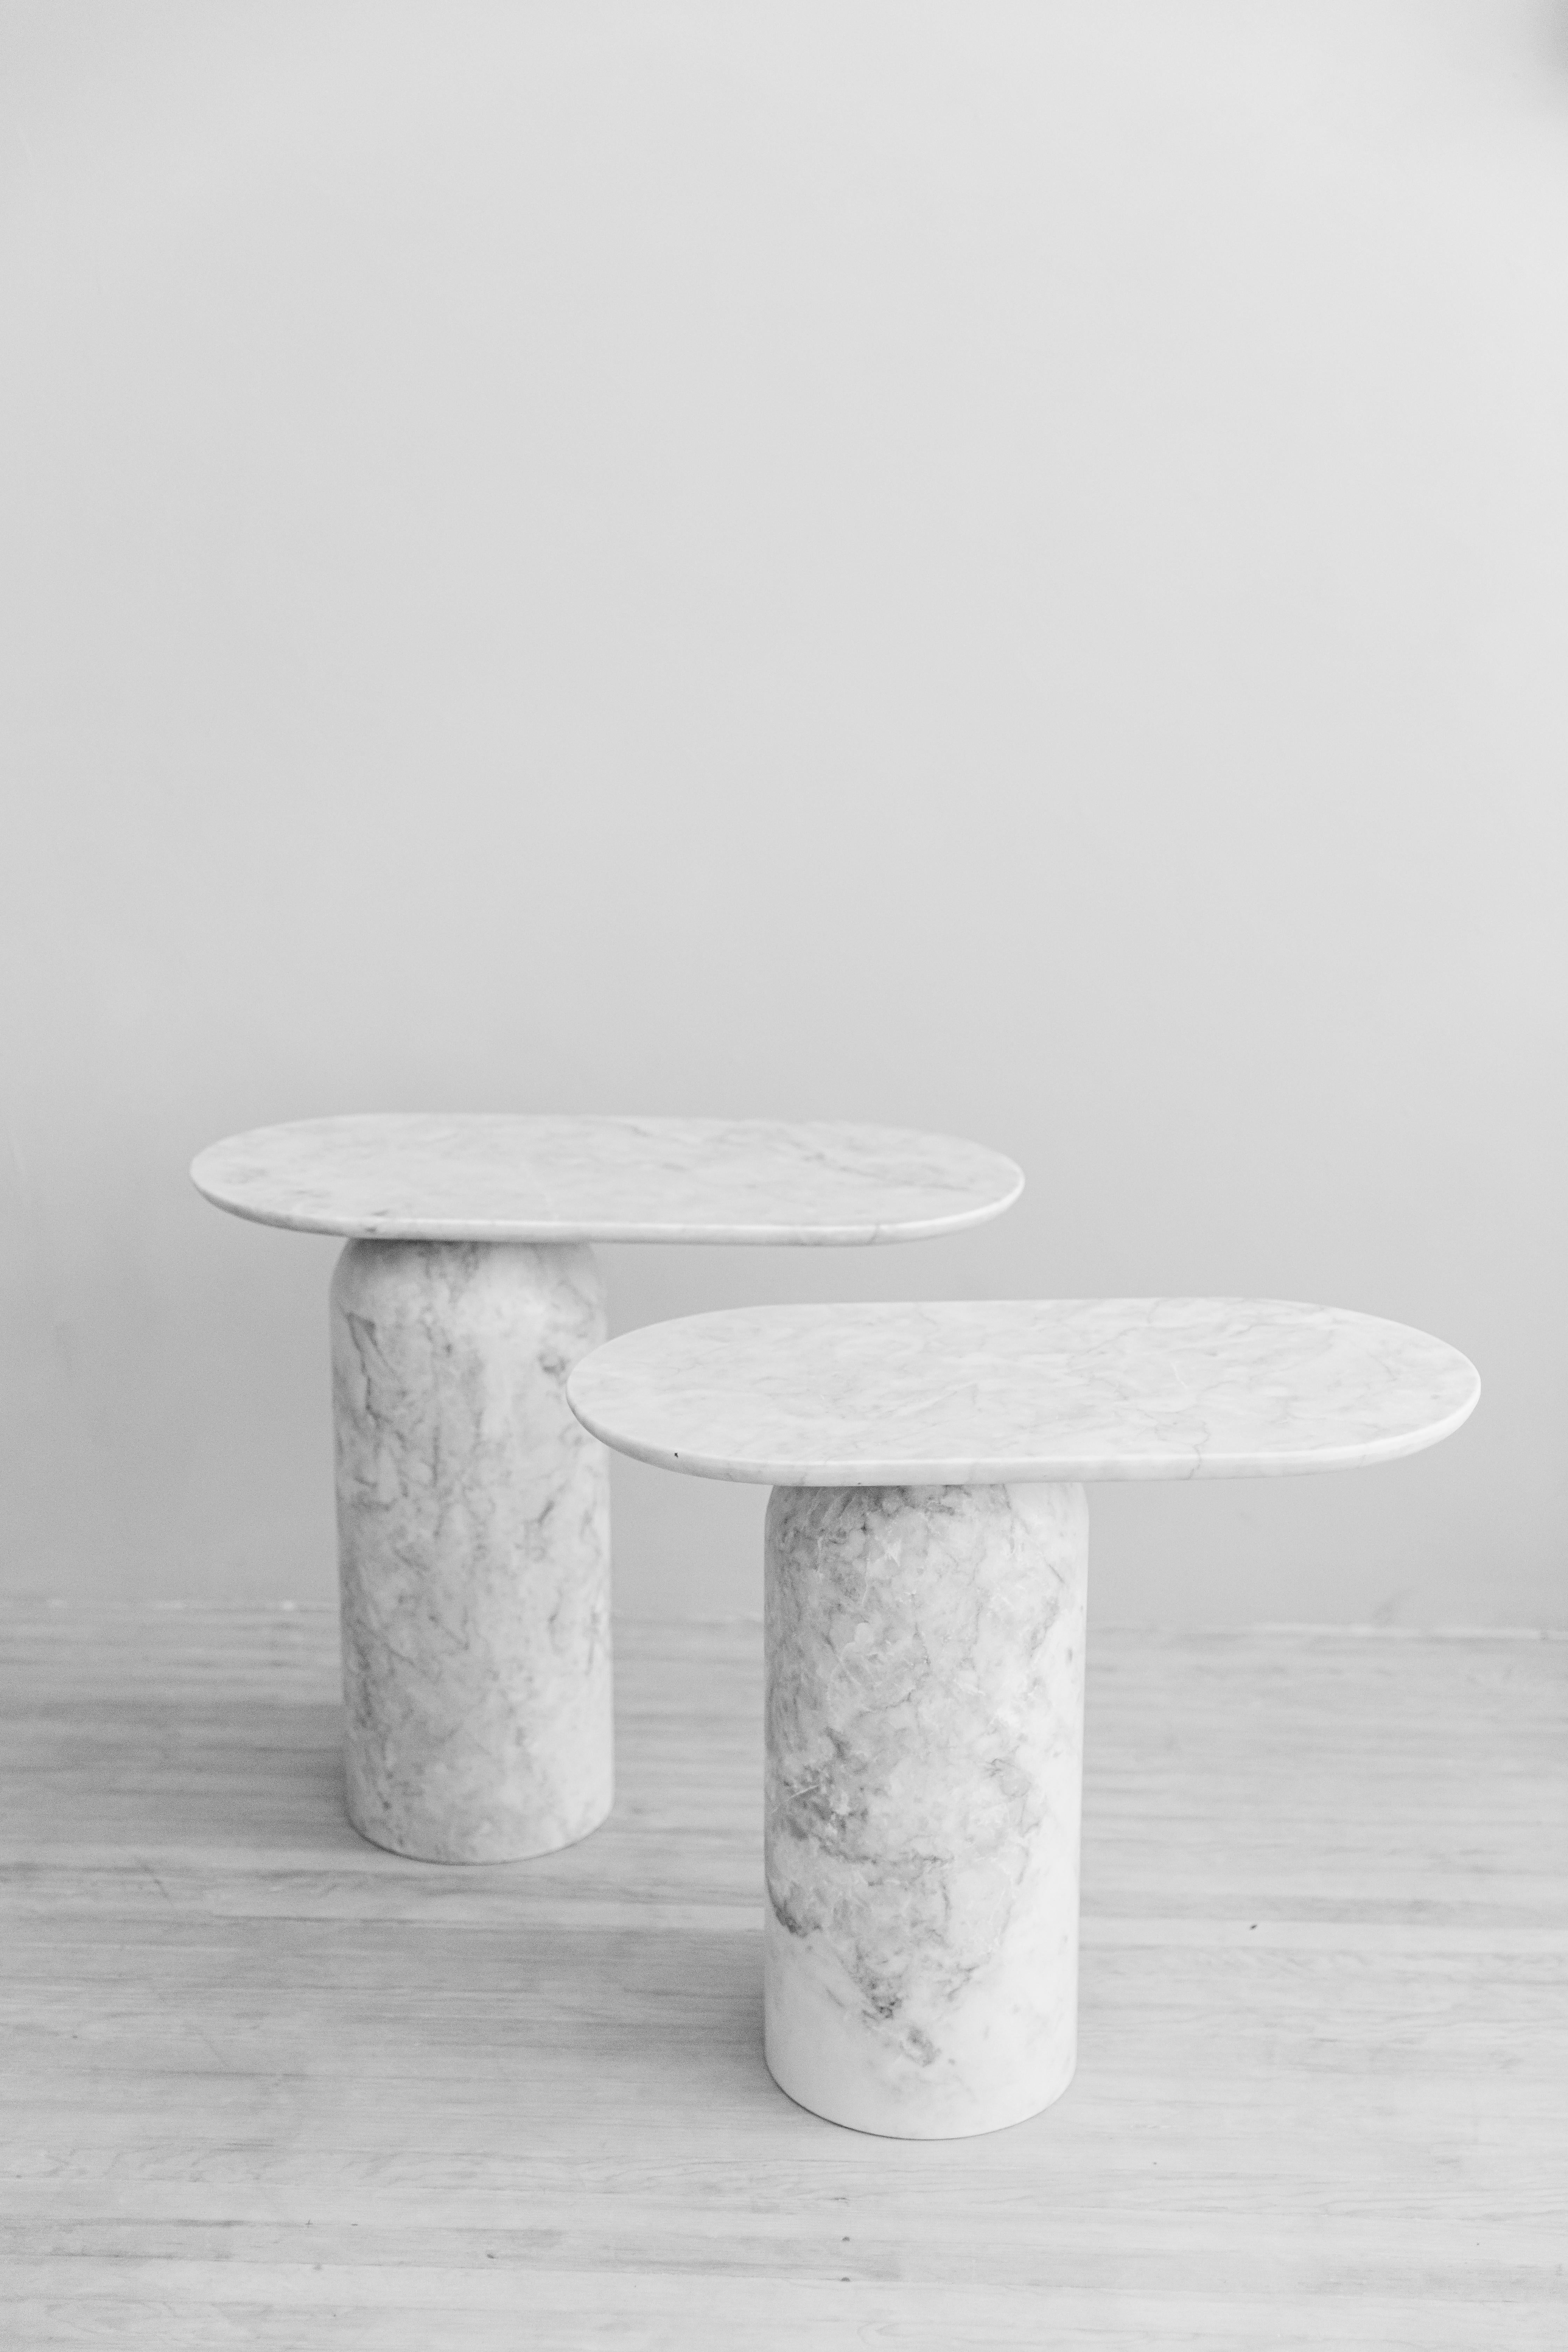 Side table in carved Veneciano white marble. Available on request in Monterrey black marble. Production time: 6-8 weeks for items without marble / 13-14 weeks for marble pieces. Shipping +10 additional business days. Casa Quieta uses natural